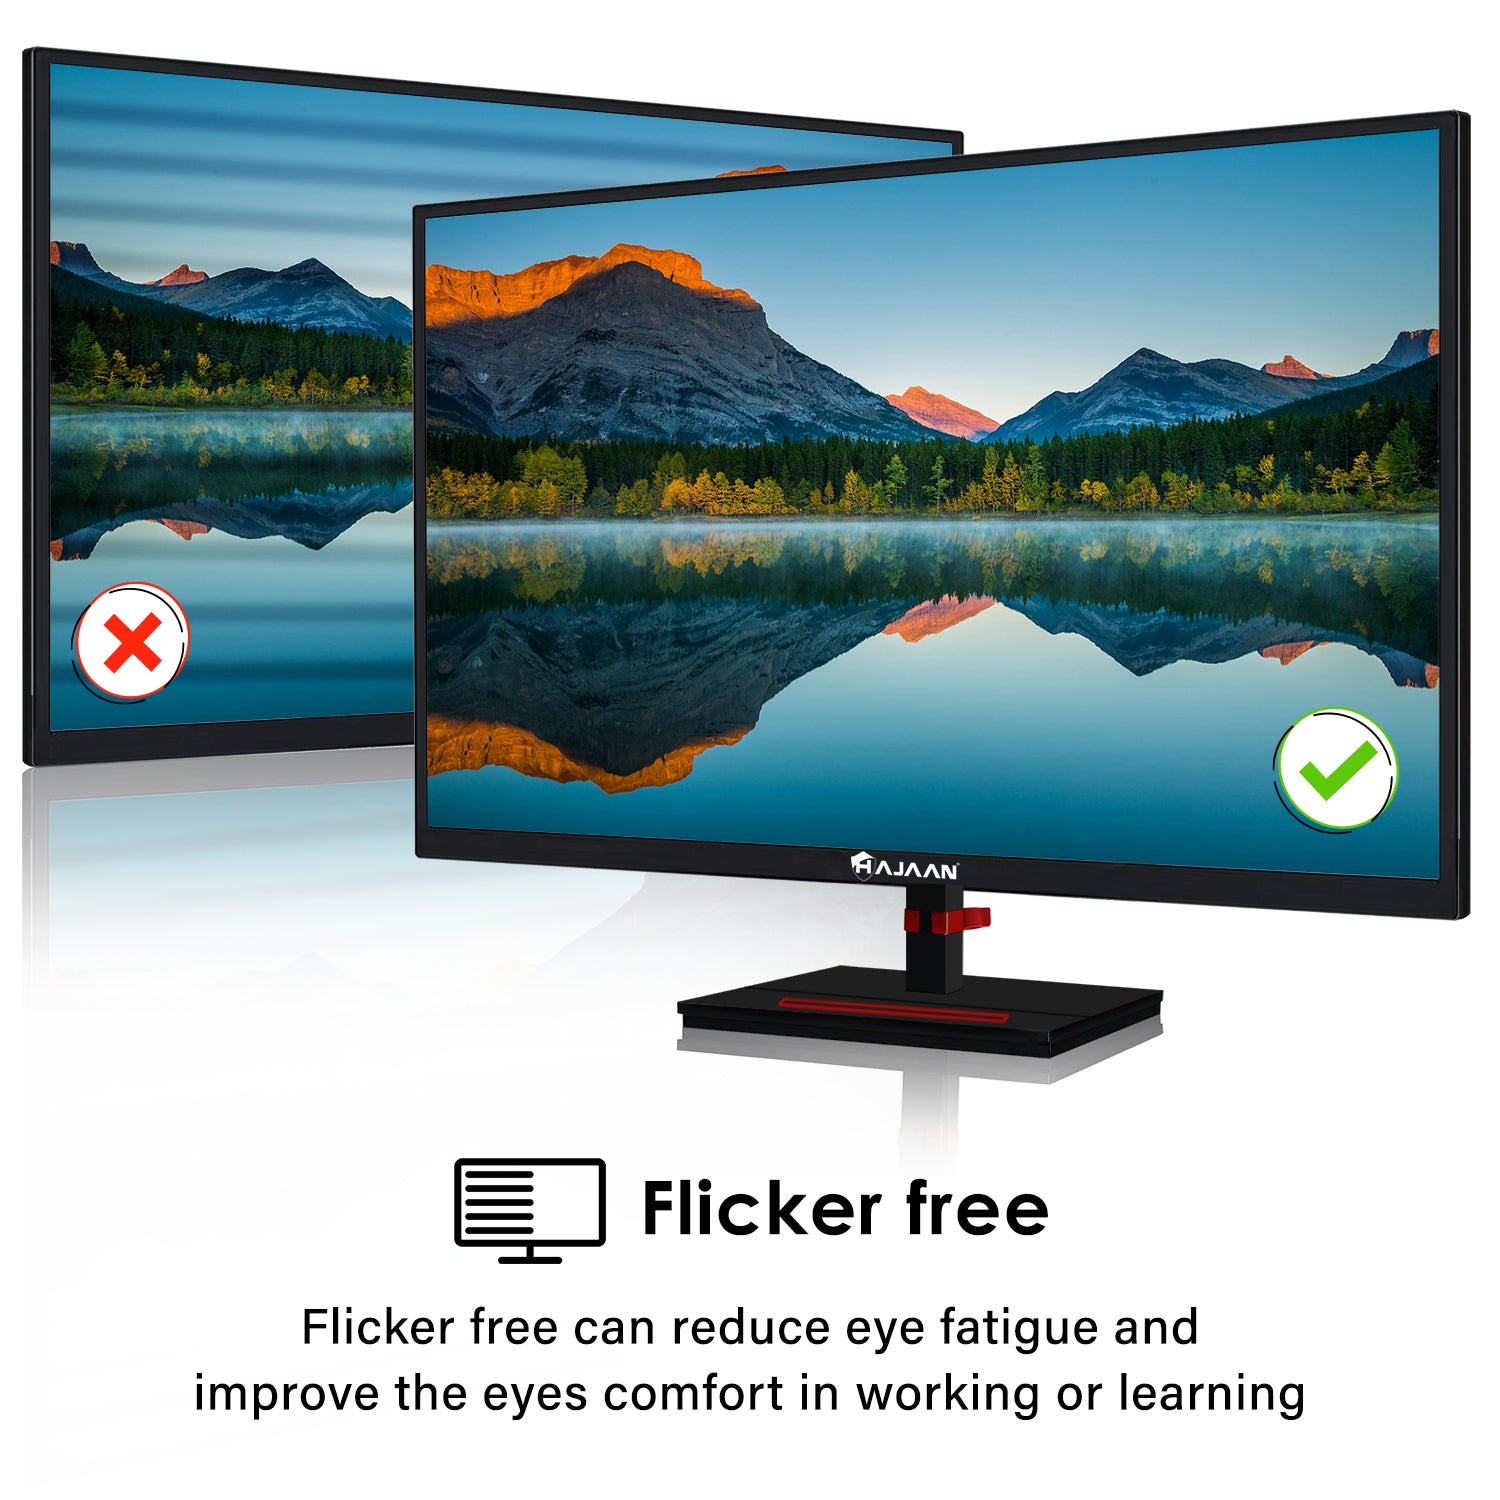 HAJAAN 22” Inch FHD Computer Monitor with Built-in Phone Holder, 75 Refresh Rate, Best for Office & Home, Ergonomic Tilt HDMI, VGA Ports WLED Monitor, FreeSync, Flicker- Free, VESA Mountable (HM220S) - NEW